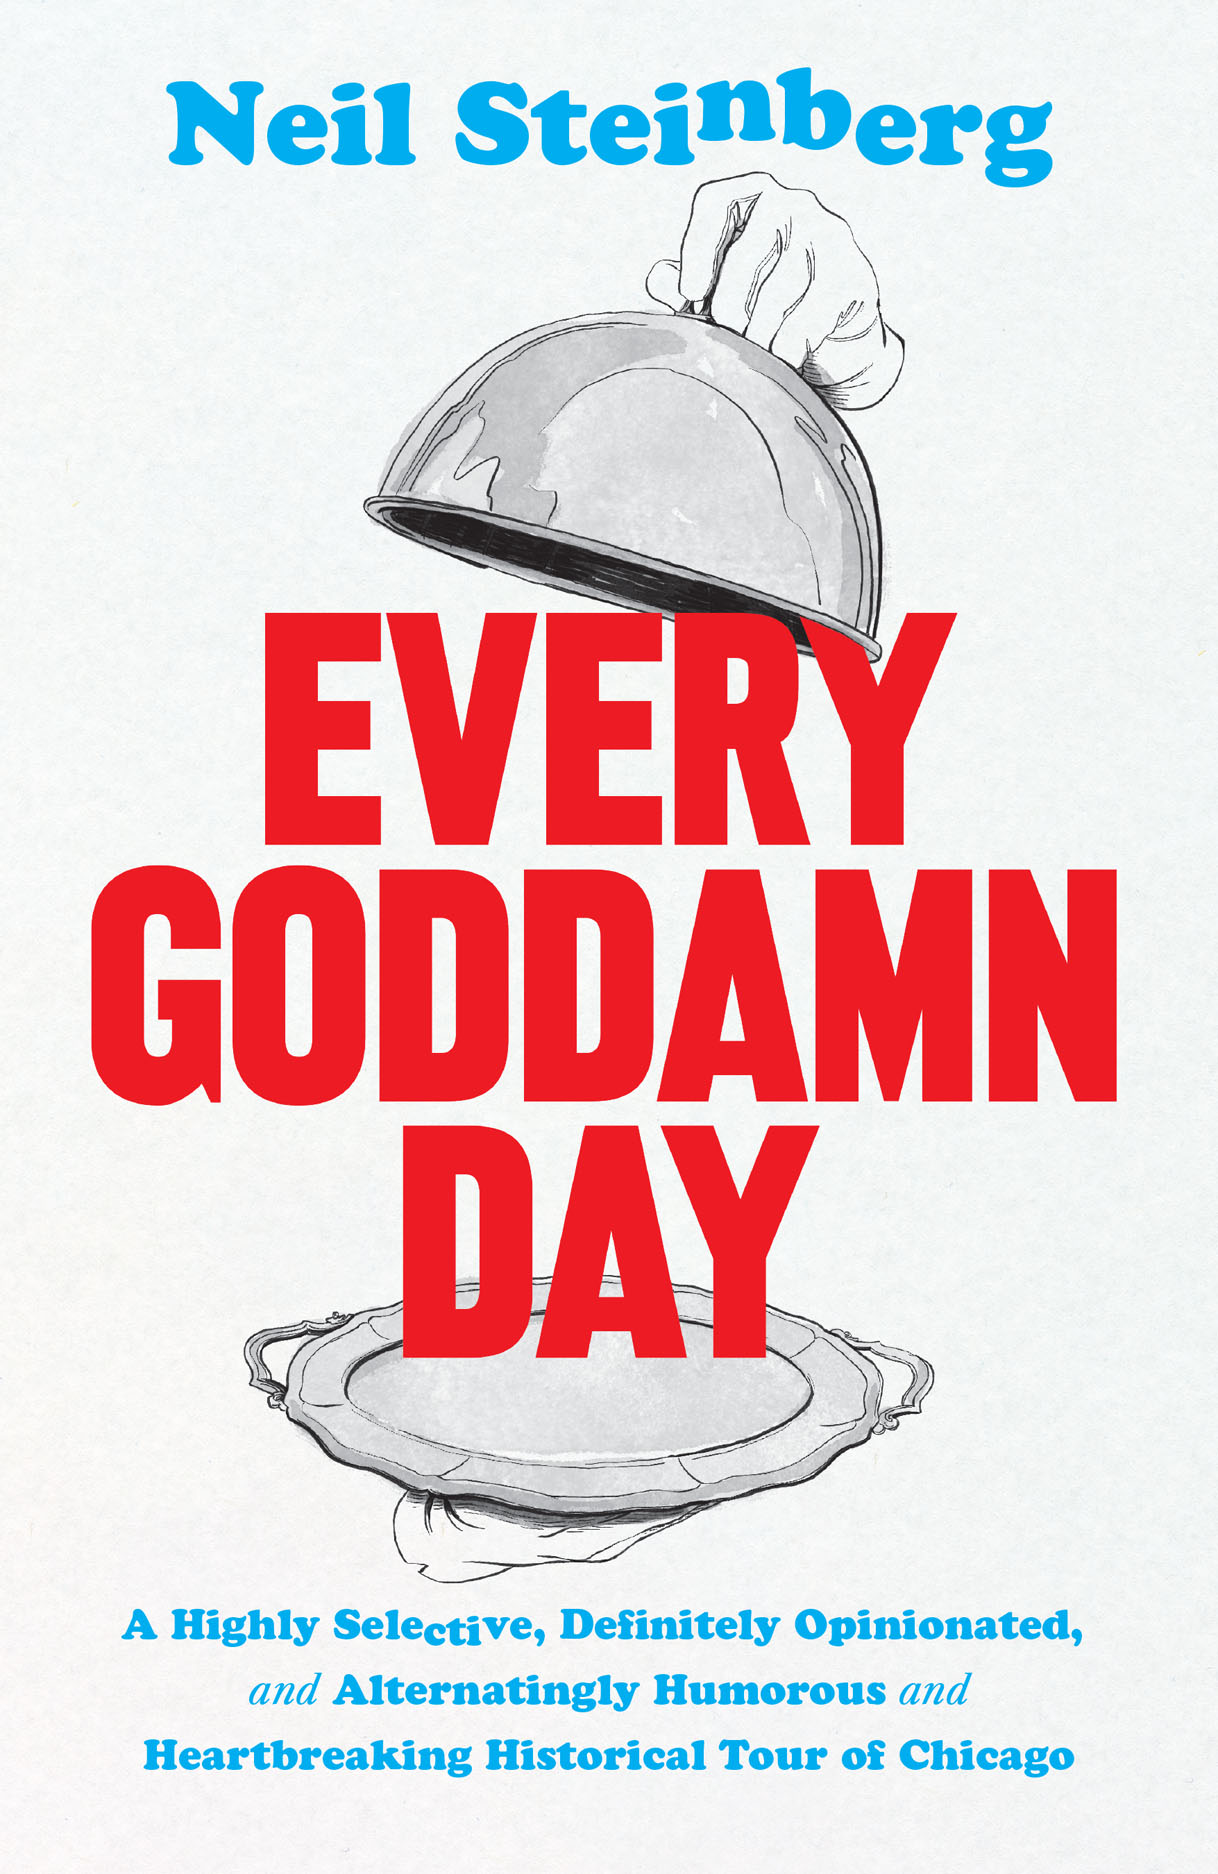 "Every Goddamn Day" book cover